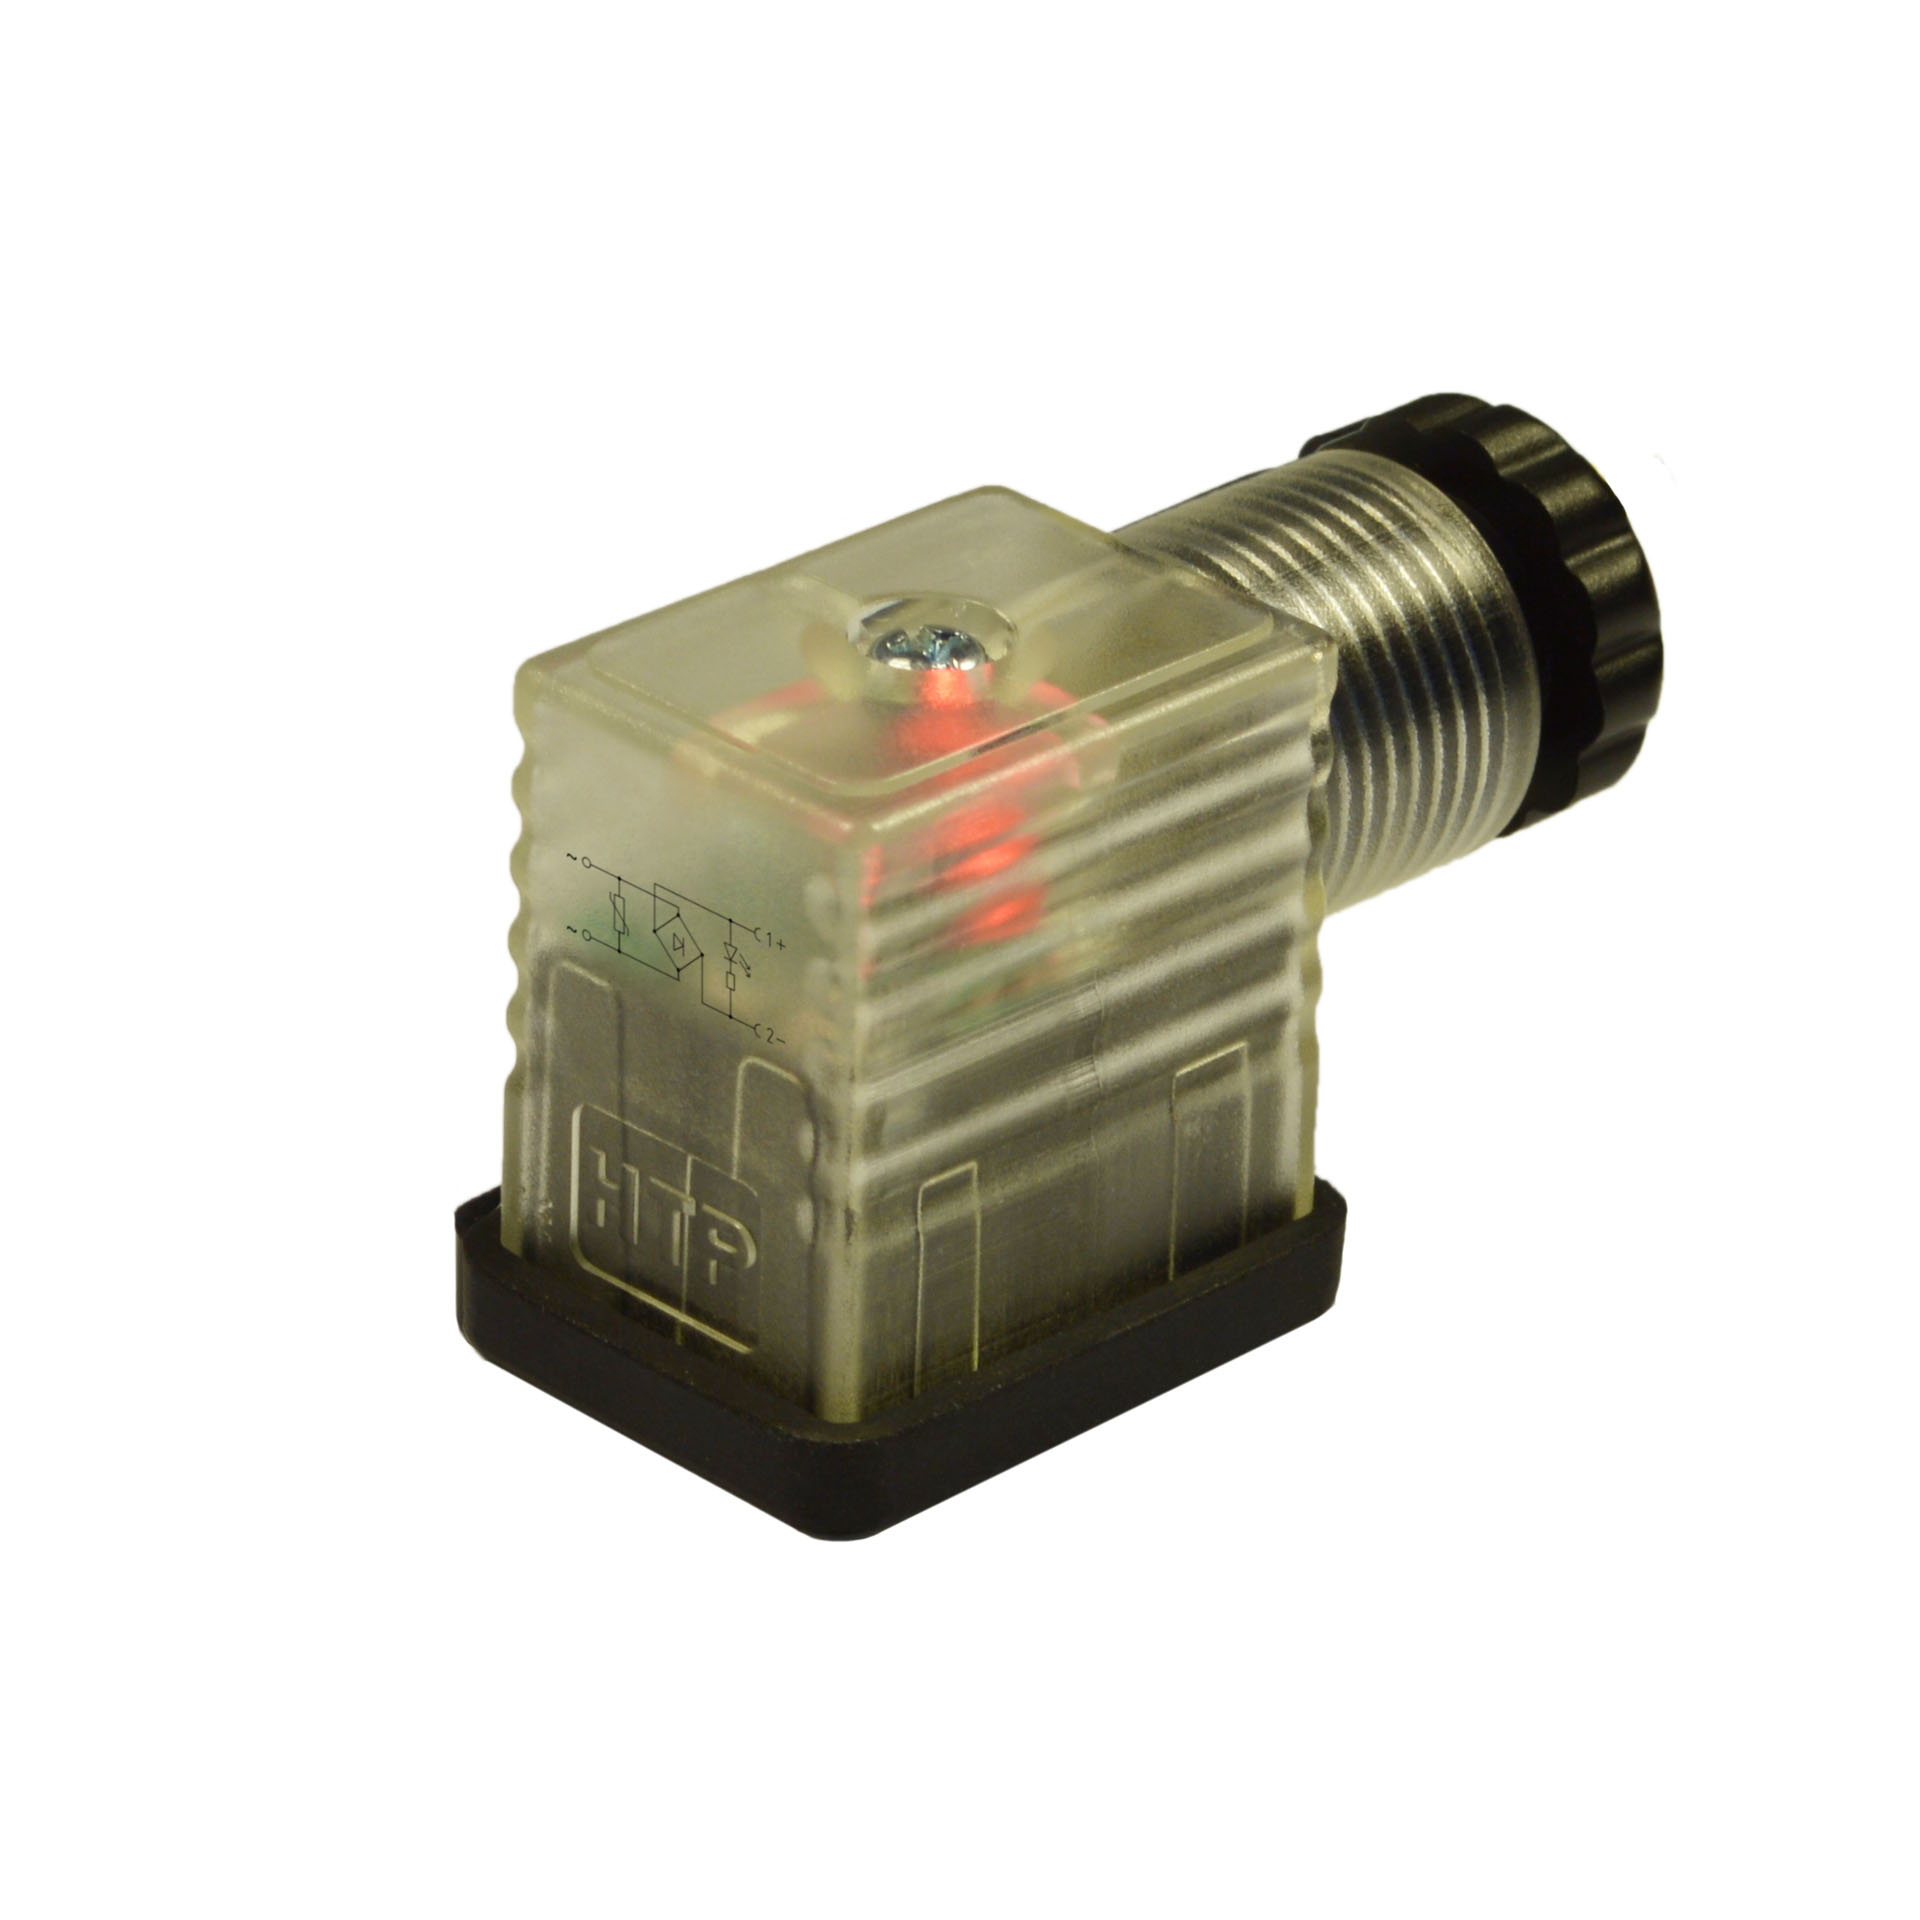 Industrial standard(typeB)field attachable,2p+PE(h.12),Red LED+vdr+rectifier,24VAC,PG9